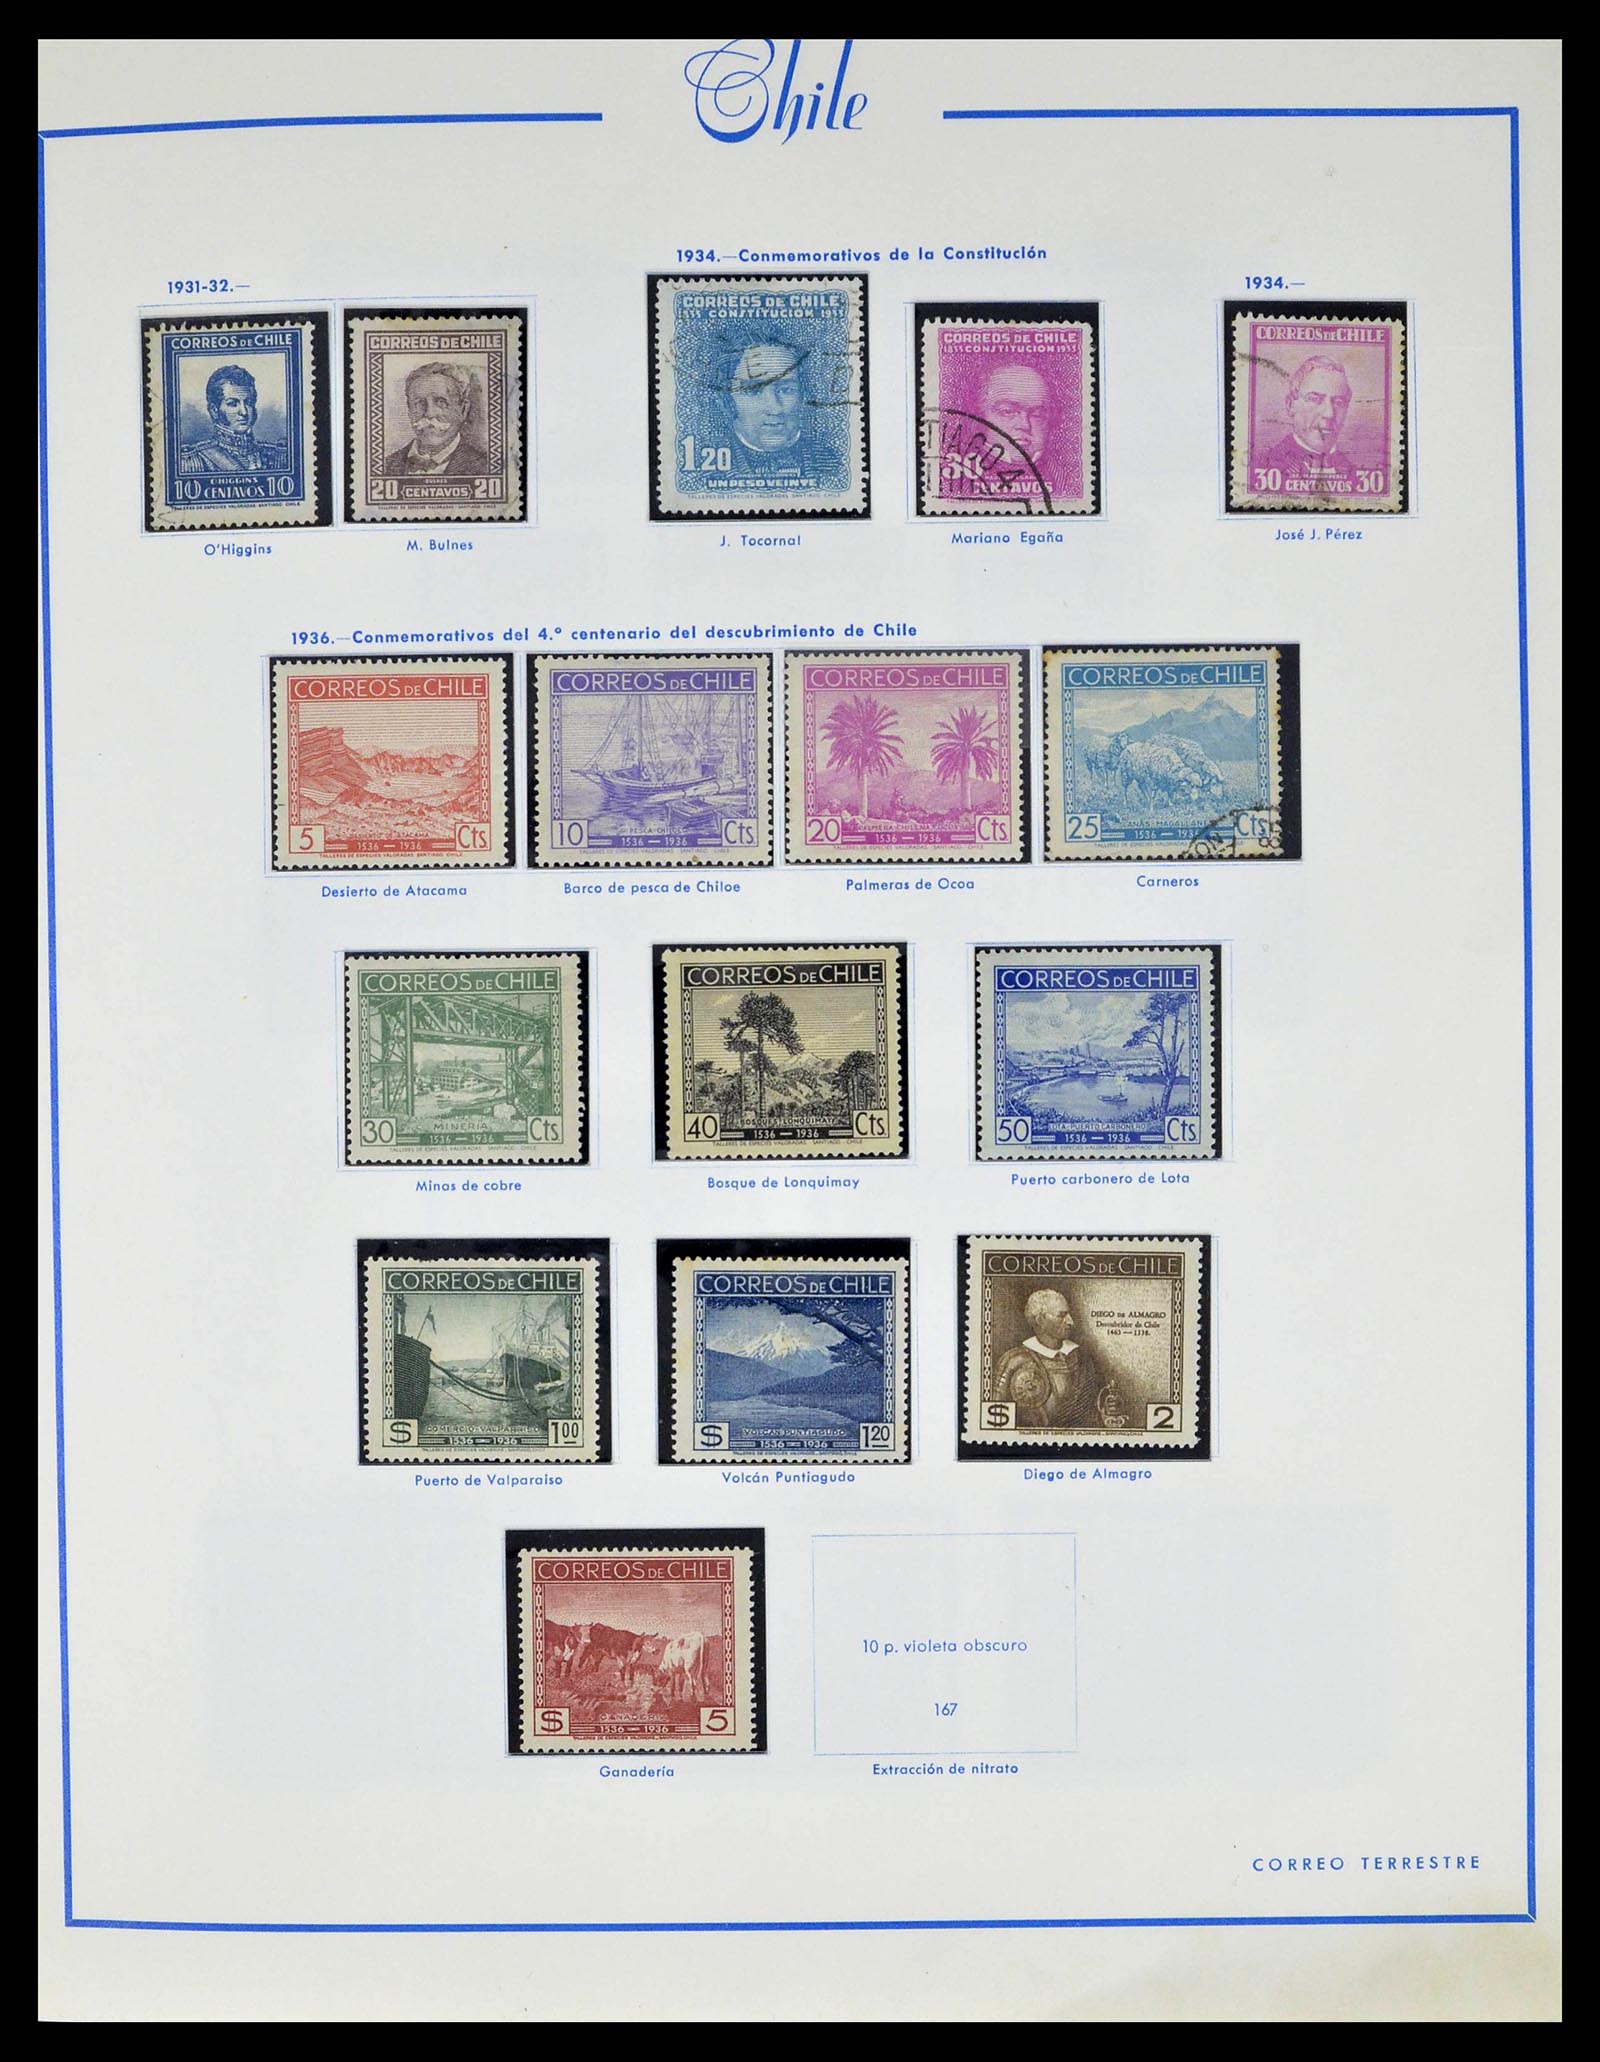 39213 0010 - Stamp collection 39213 Chile 1853-1970.